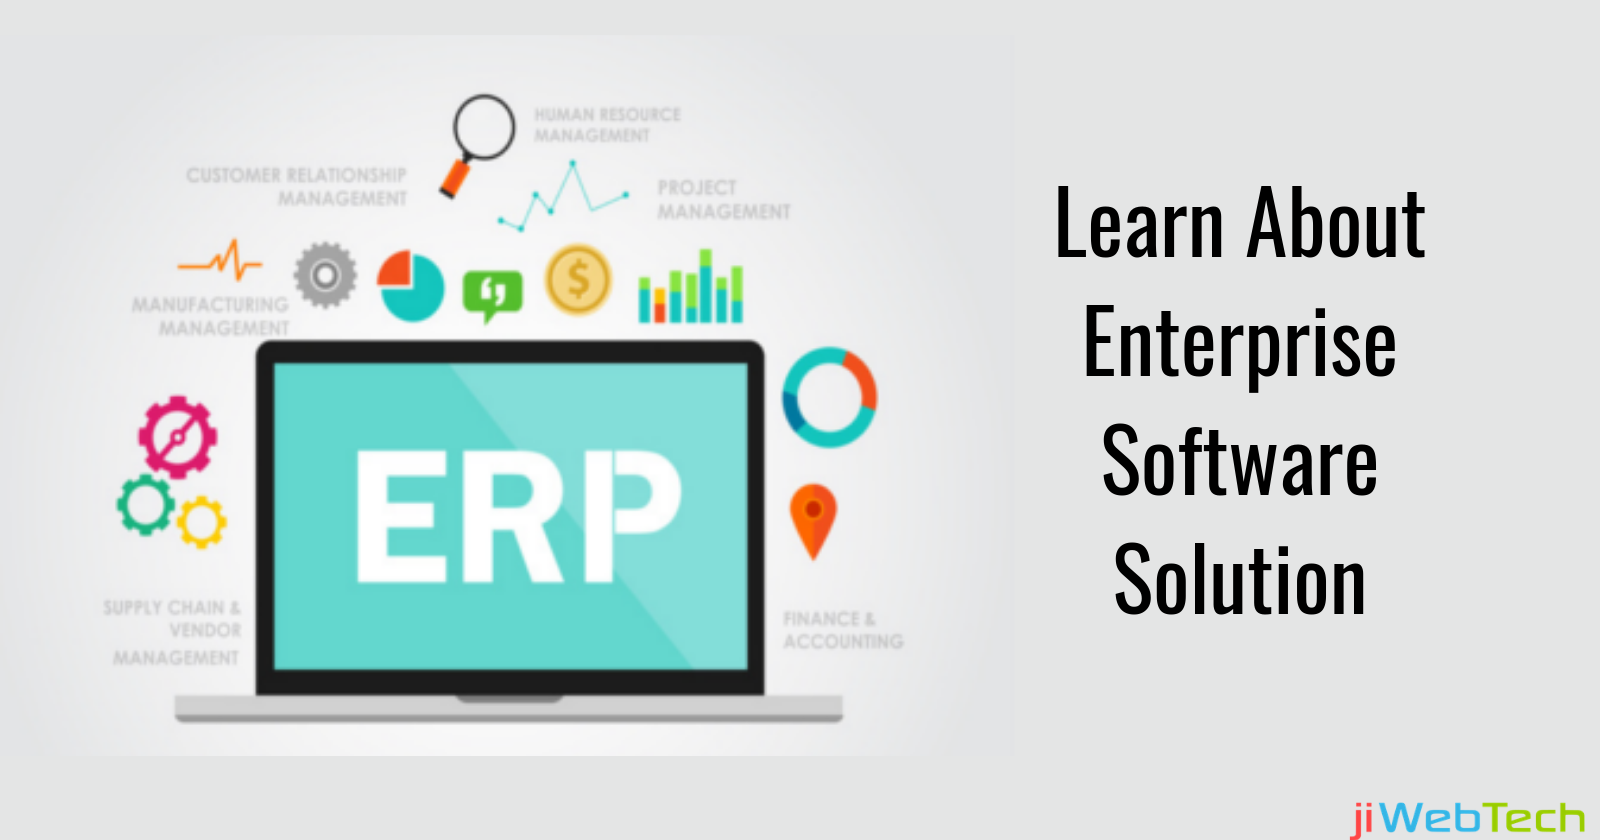 How Enterprise Software Solution Differ From Other Software